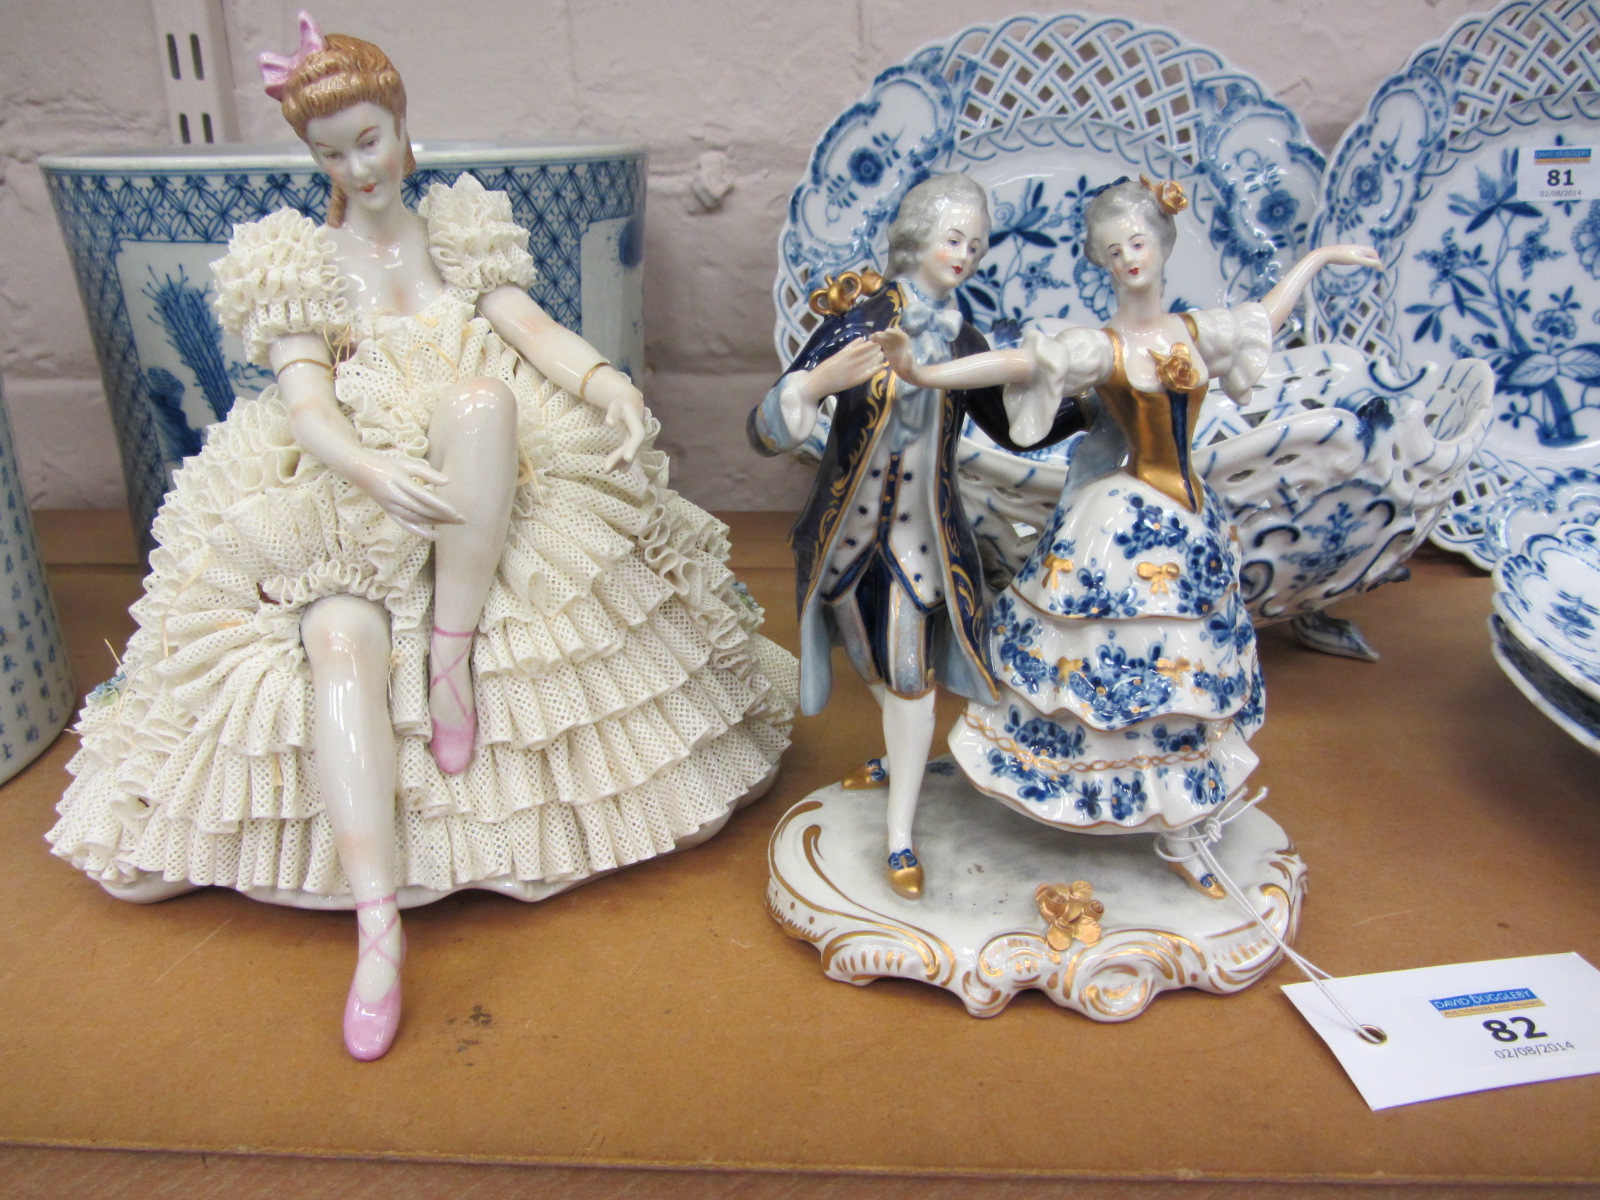 German Unterweissbach porcelain figure of a ballerina and another blue and white group of dancers